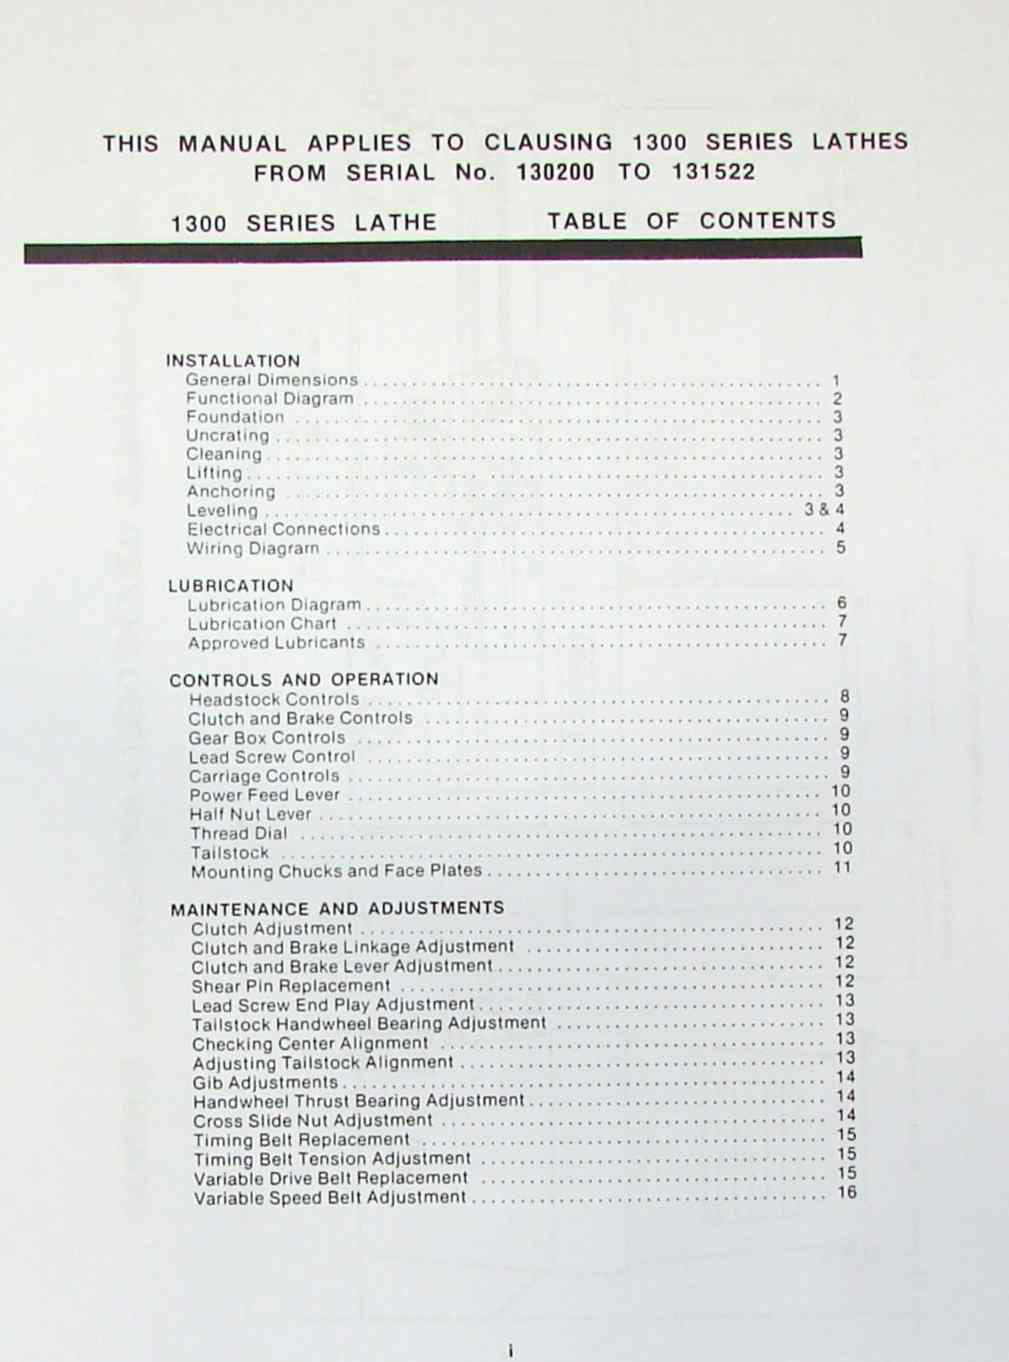 Clausing 1300 Series Lathe Operating Instructions and Parts List Manual 1972 